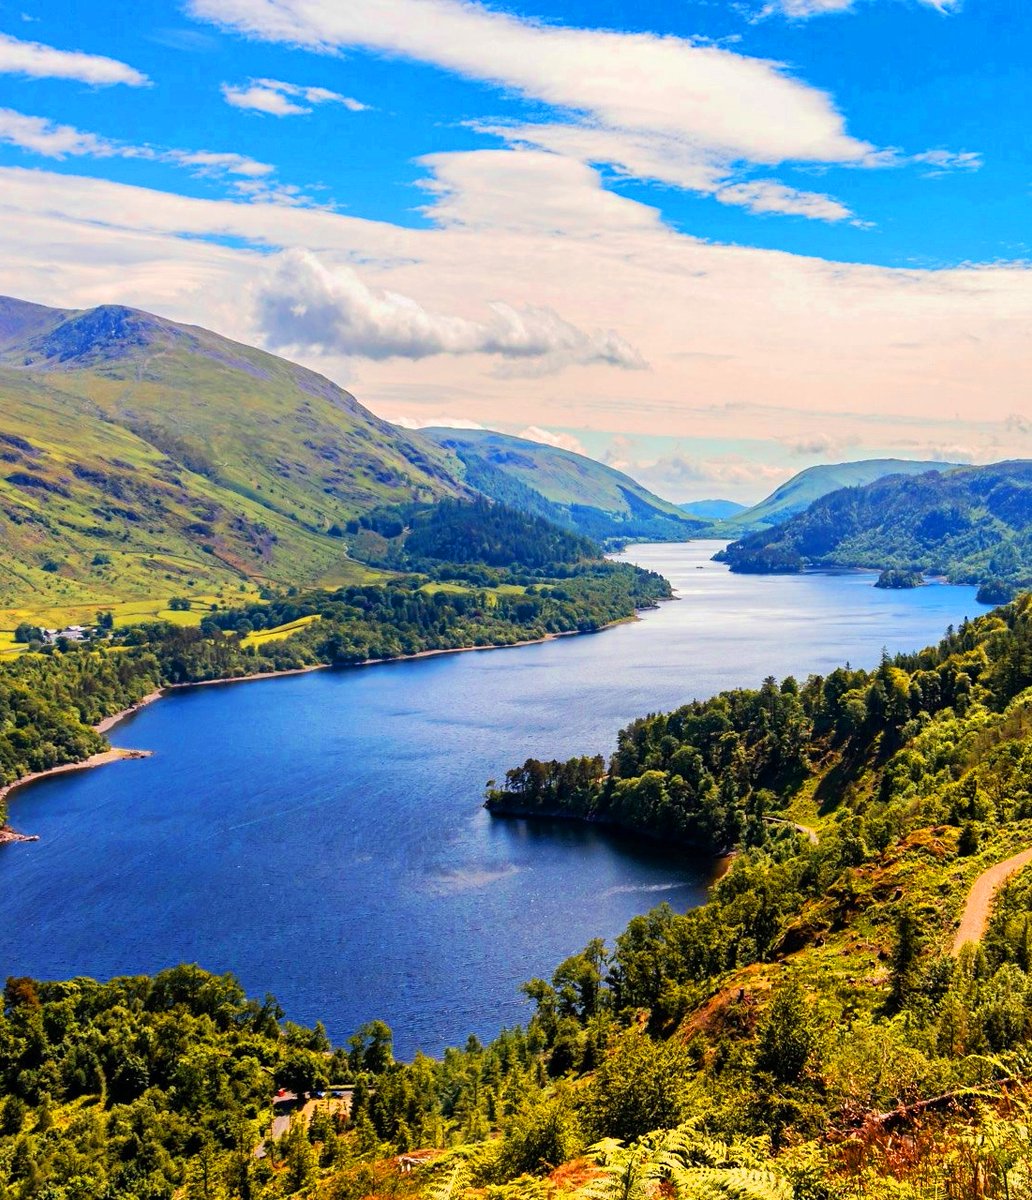 Thirlmere is a long thin lake, sandwiched between two mountains, It's a reservoir in the Borough of Allerdale in Cumbria and the English Lake District. 🏴󠁧󠁢󠁥󠁮󠁧󠁿 🇬🇧 

#nature #naturephotography #naturebeauty #scenic #photography 

Wikipedia: en.wikipedia.org/wiki/Thirlmere